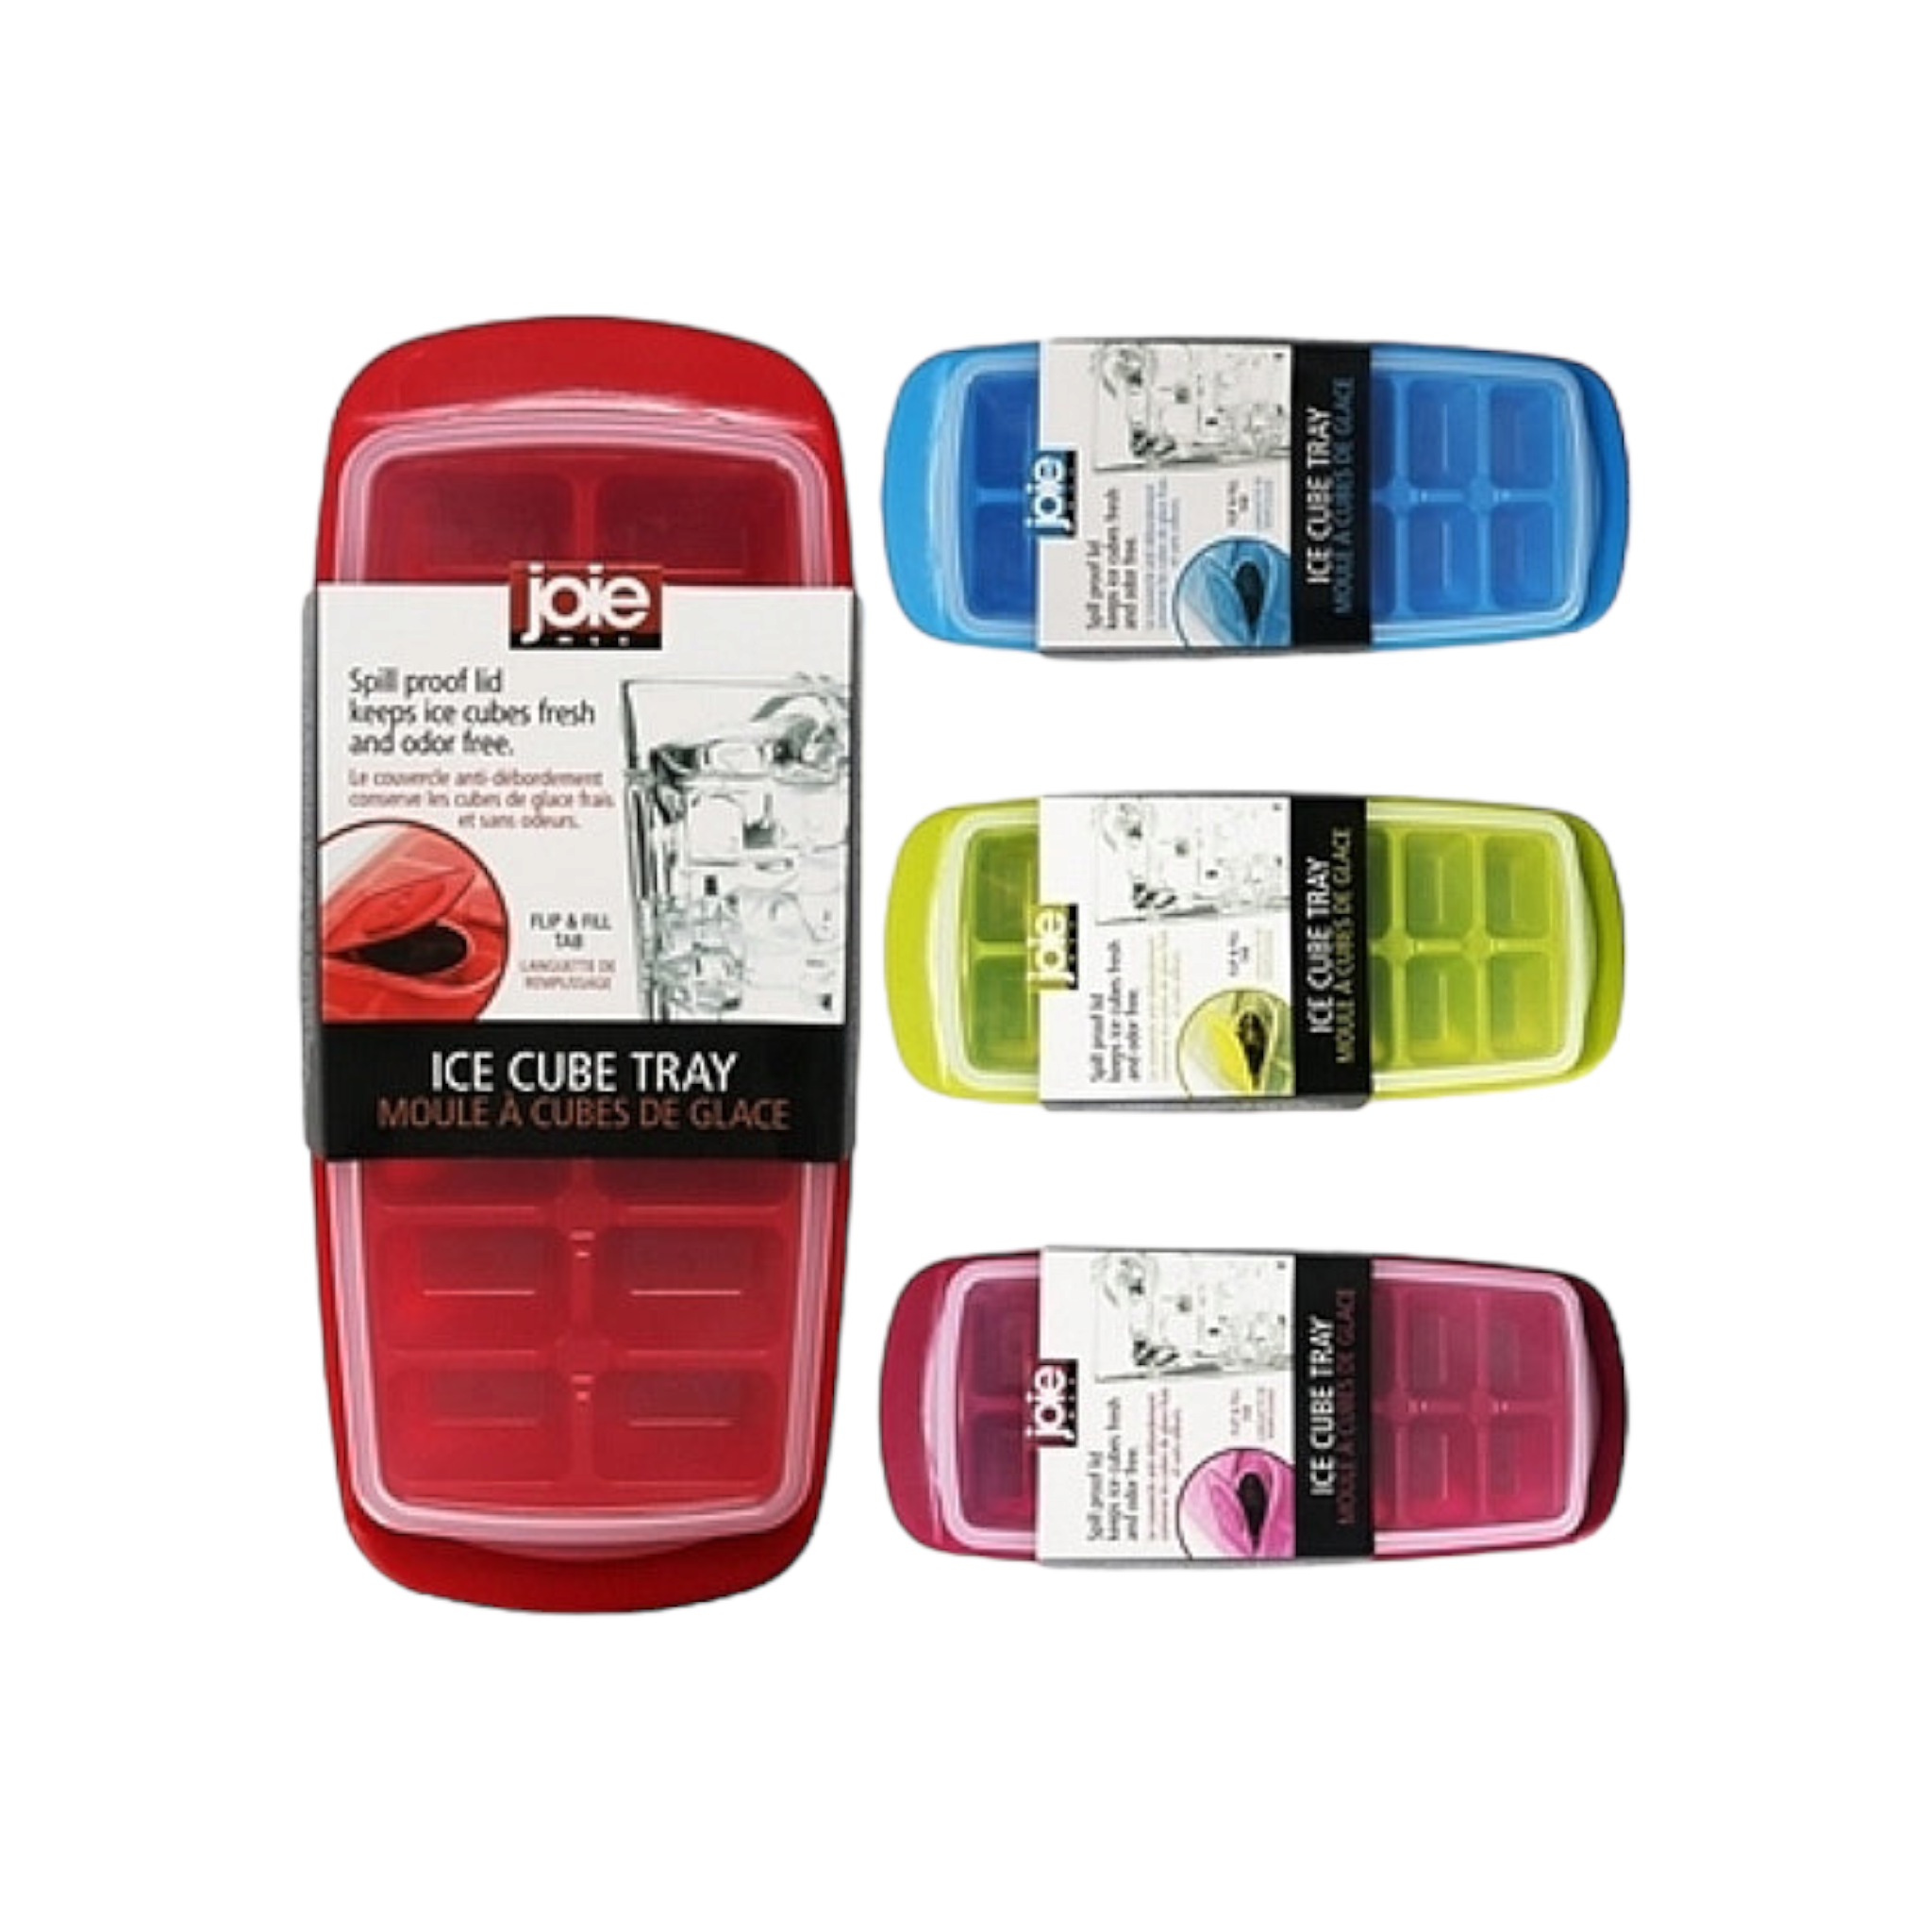 Joie Ice Cube Tray Mini 15 Grid Assorted Colour Flip n Fill 14686